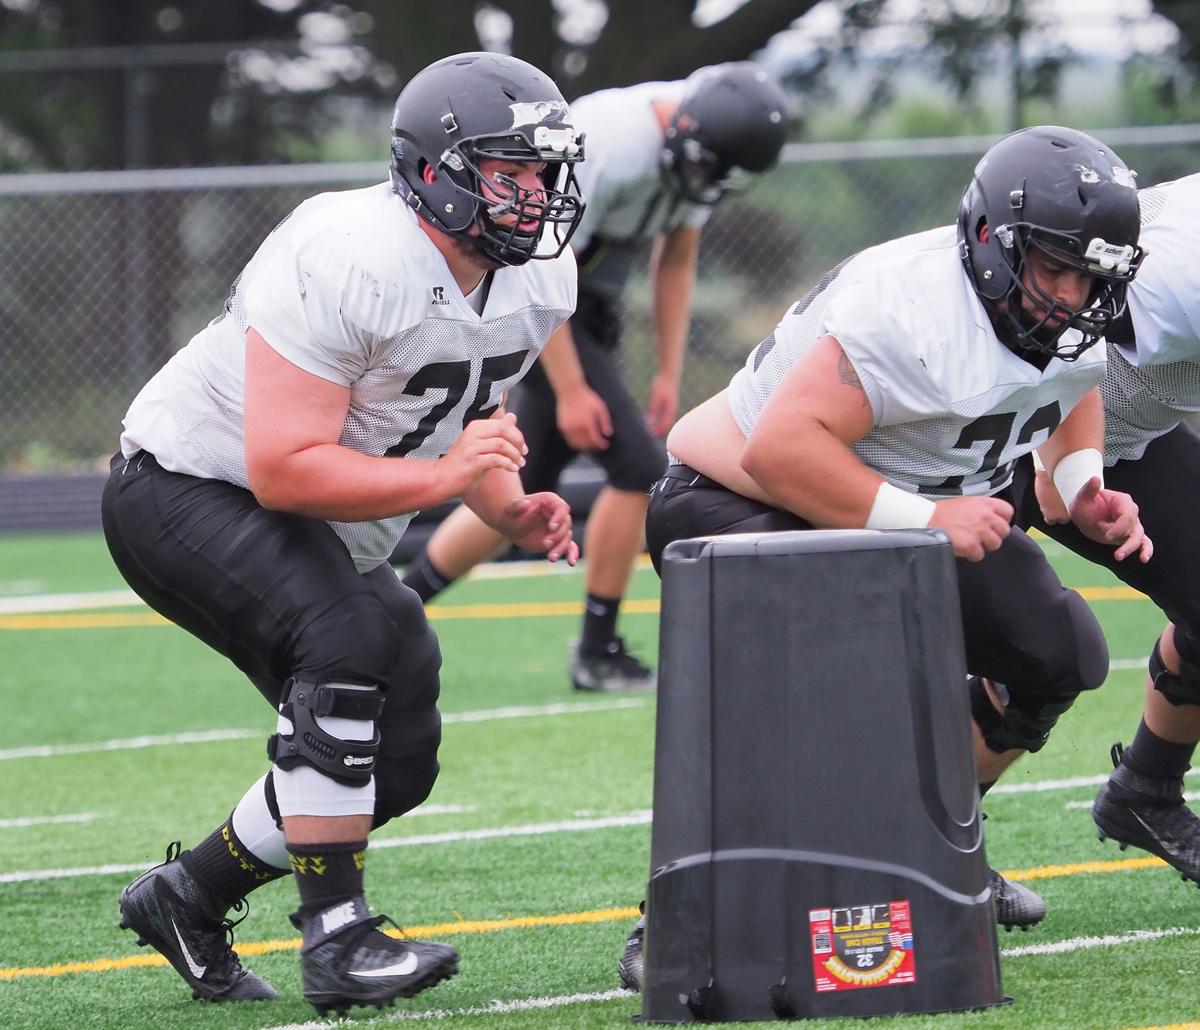 Dordt's offensive line is on the same page | College | siouxcityjournal.com